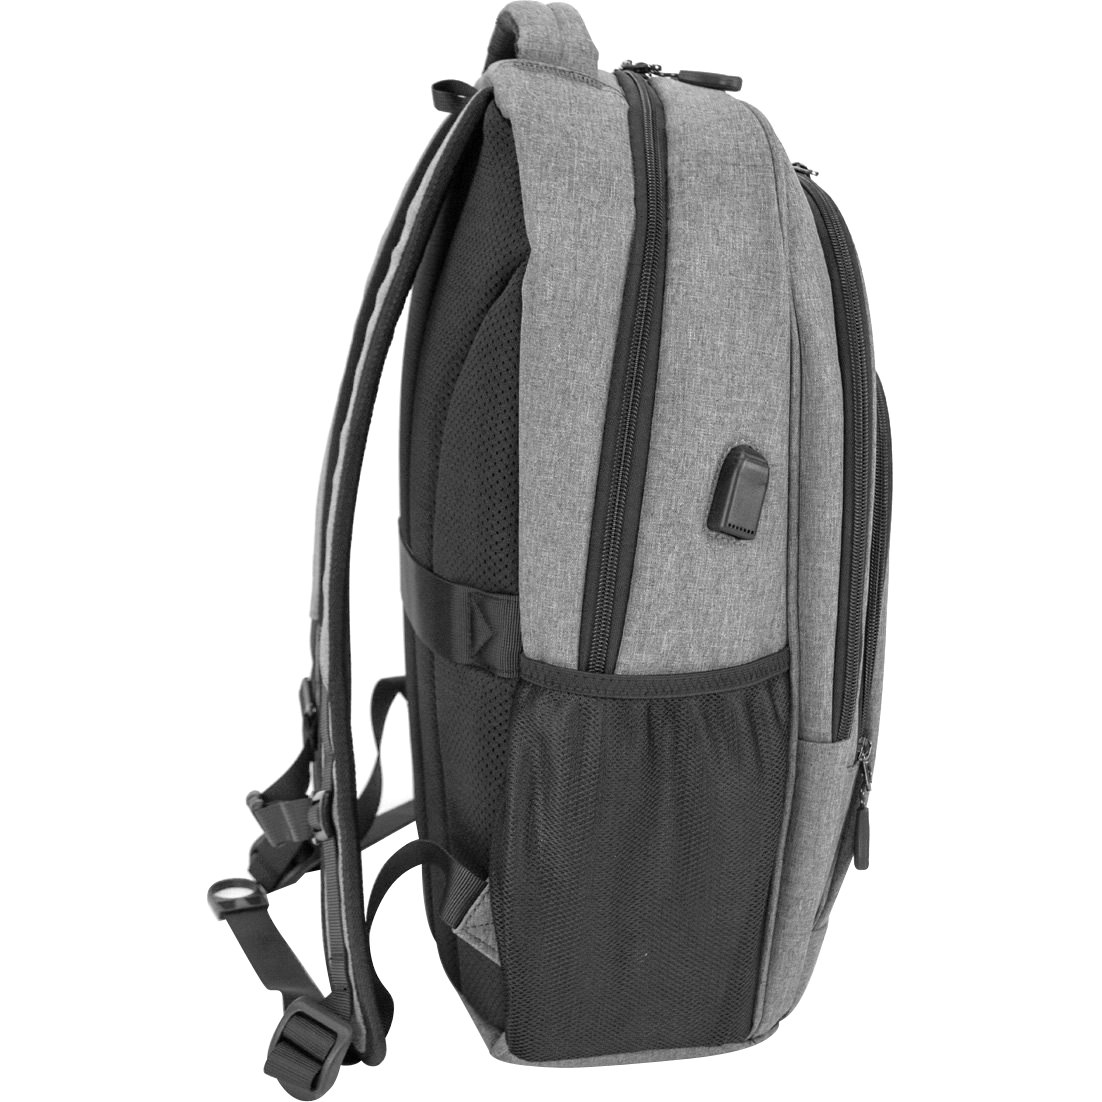 Mobile Edge Commuter Carrying Case Rugged (Backpack) for 15.6" to 16" Notebook, Travel Essential - Gray